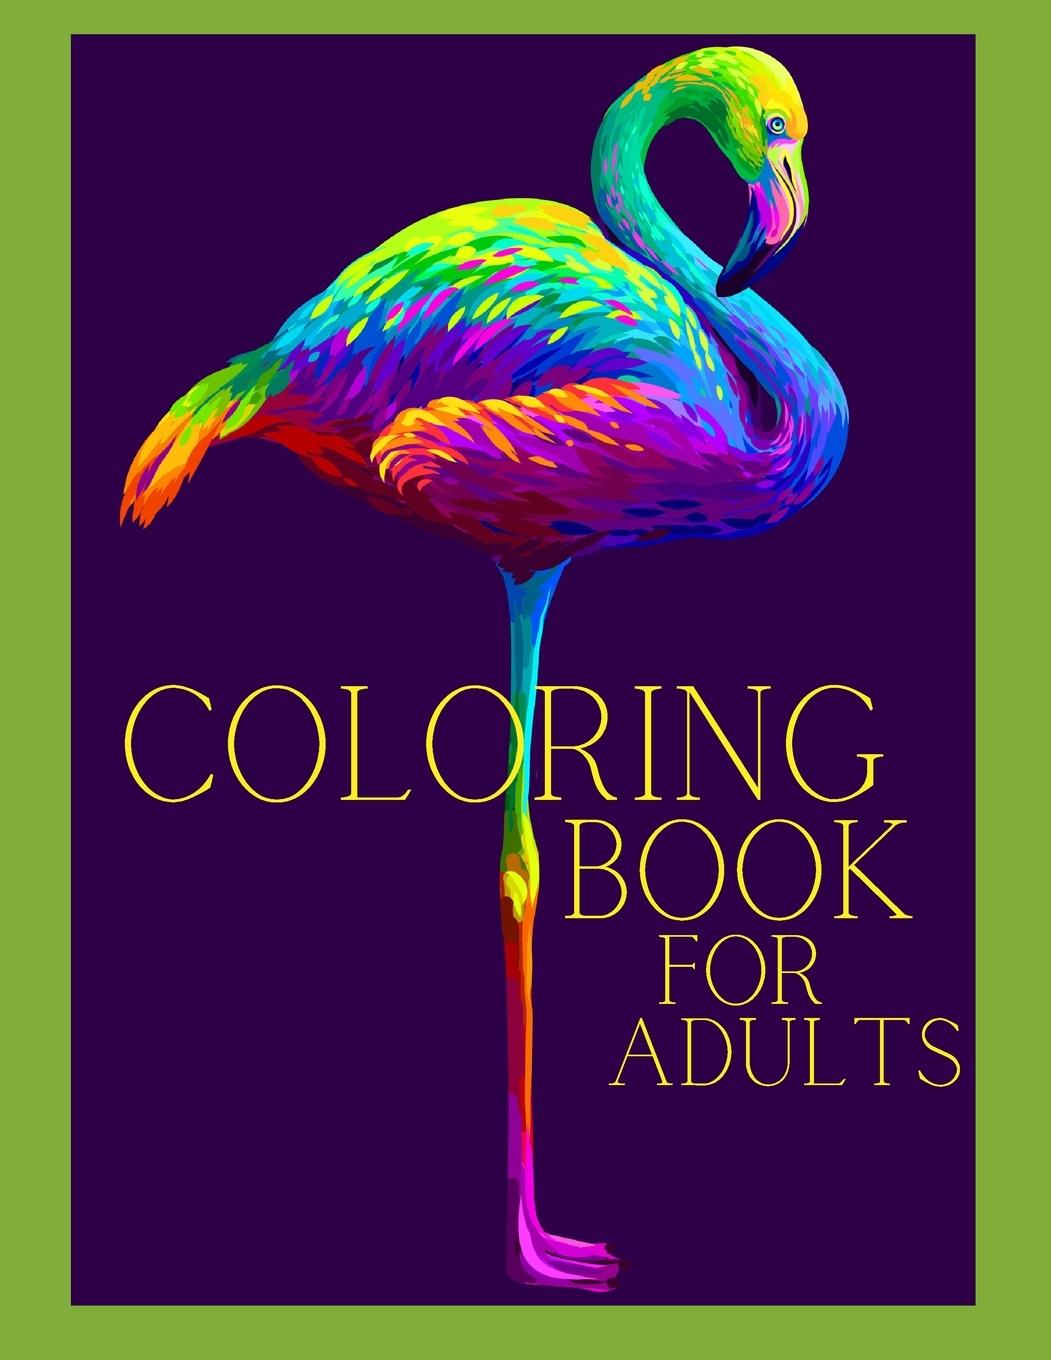 Coloring Book for Adults|Animals Coloring Book Adult | Stress Relieving Animal Designs, Mandala, Flowers and More.| Relaxation coloring - Publications, Victor Pohe